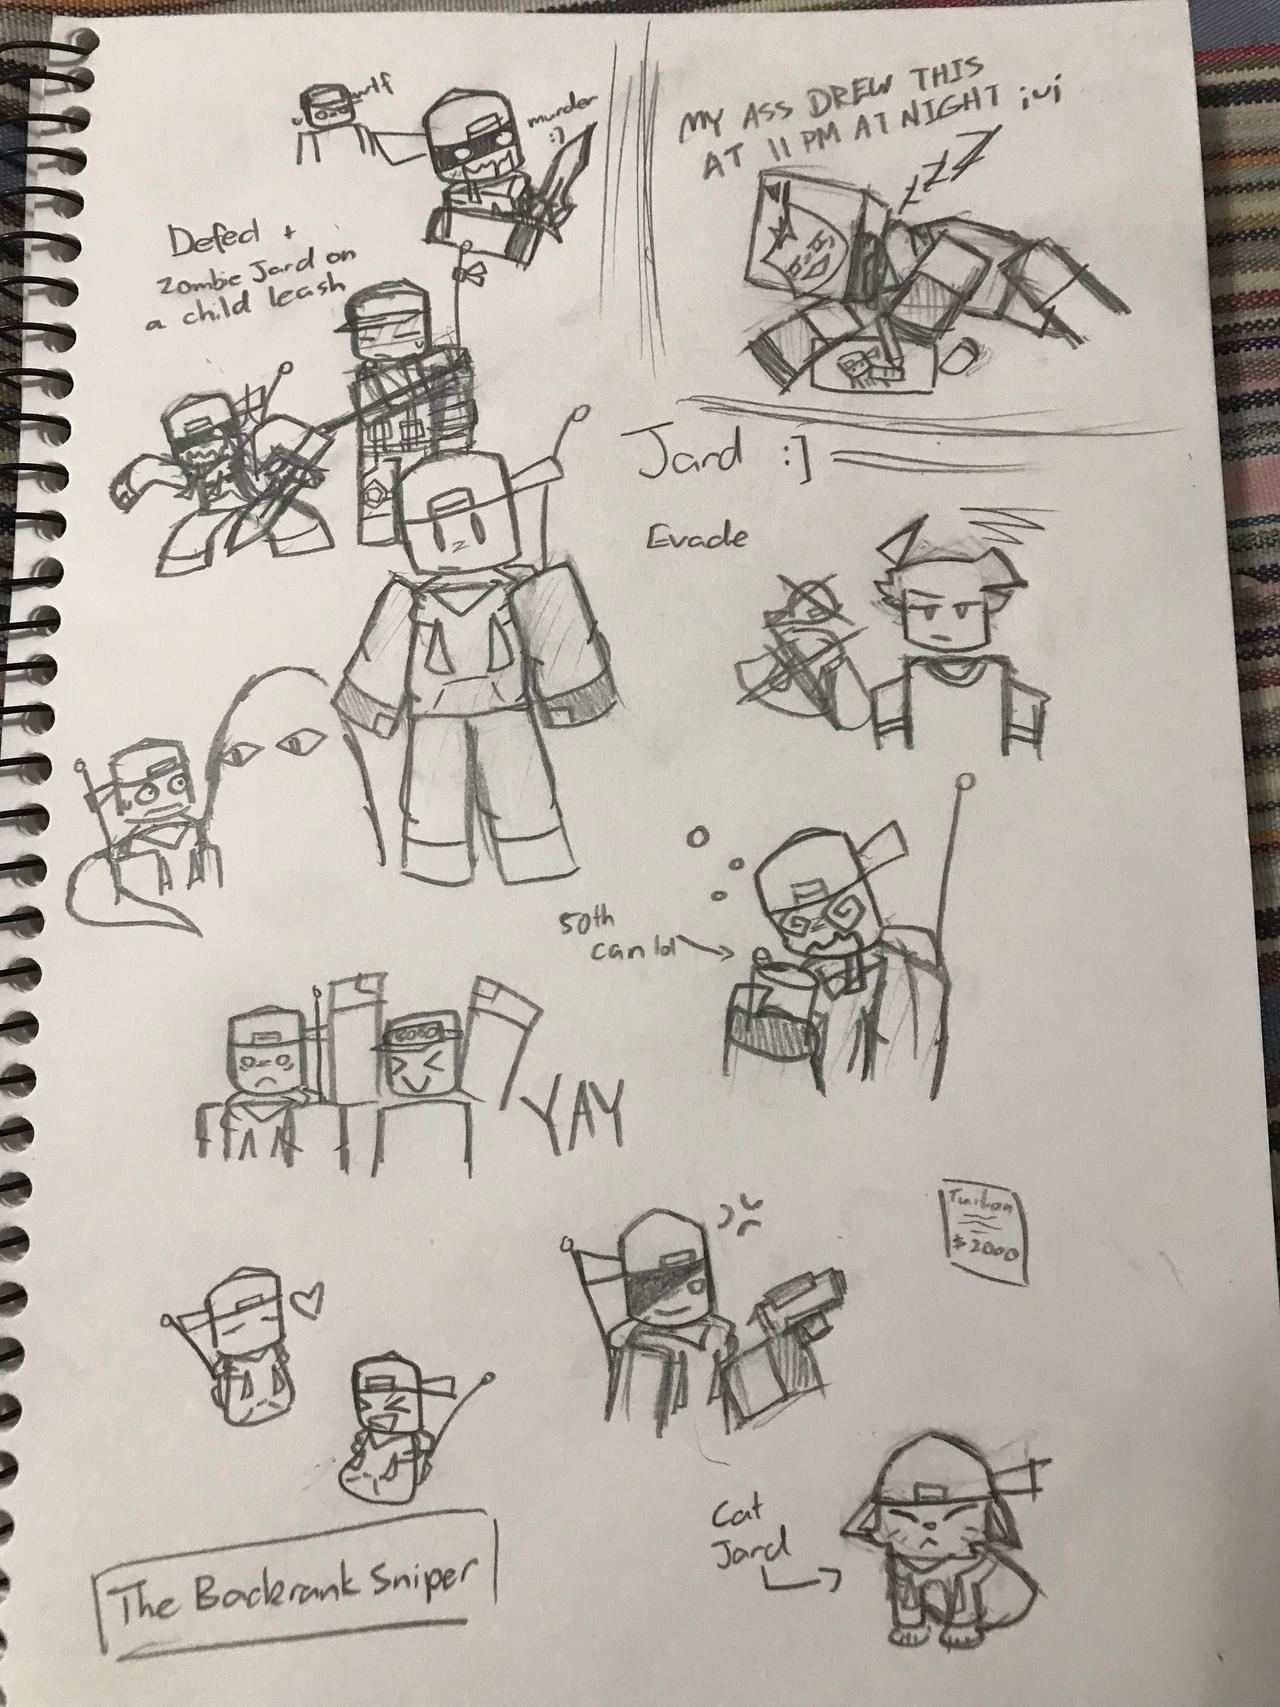 I drew a player who saved me on evade, art by me :3 : r/roblox